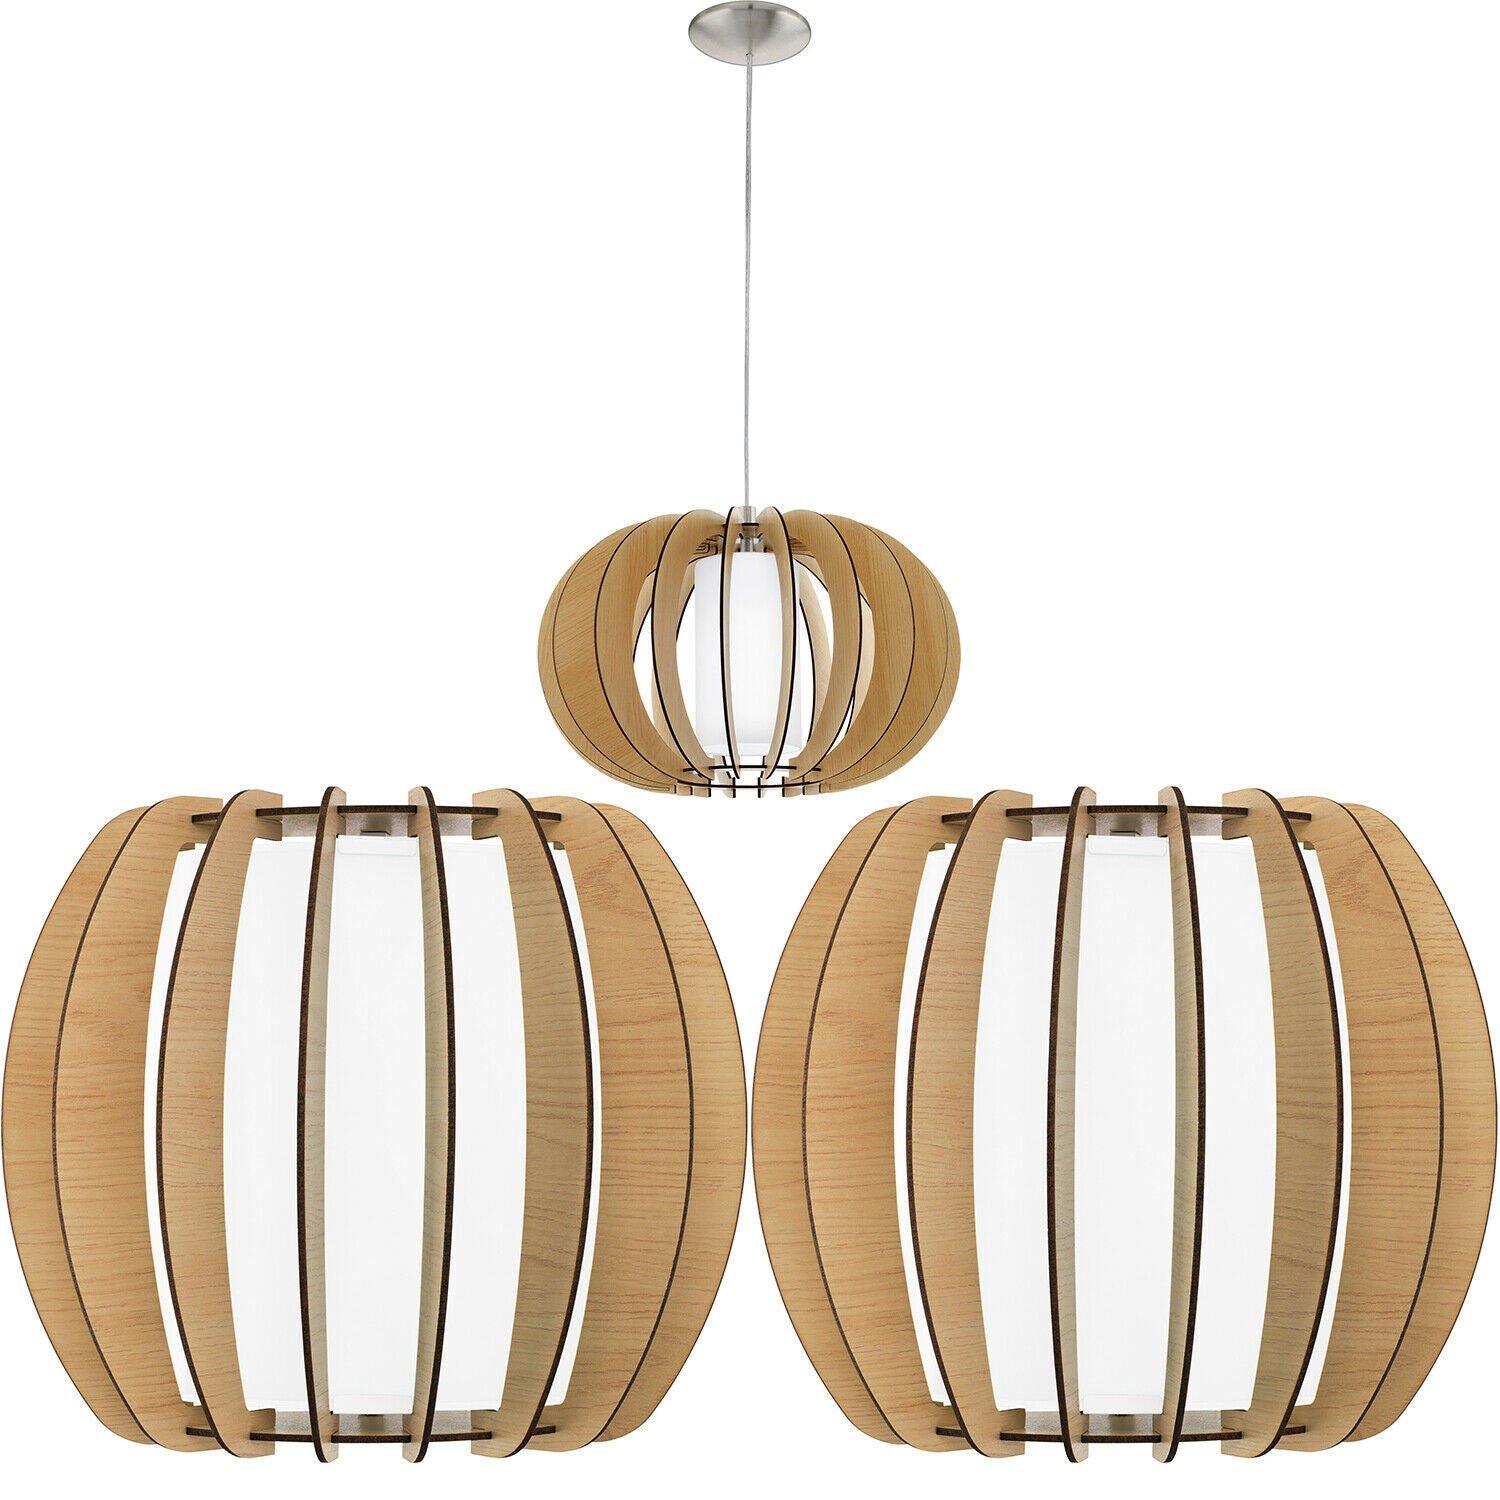 Ceiling Pendant Light & 2x Matching Wall Lights Maple Wood & White Glass Shade